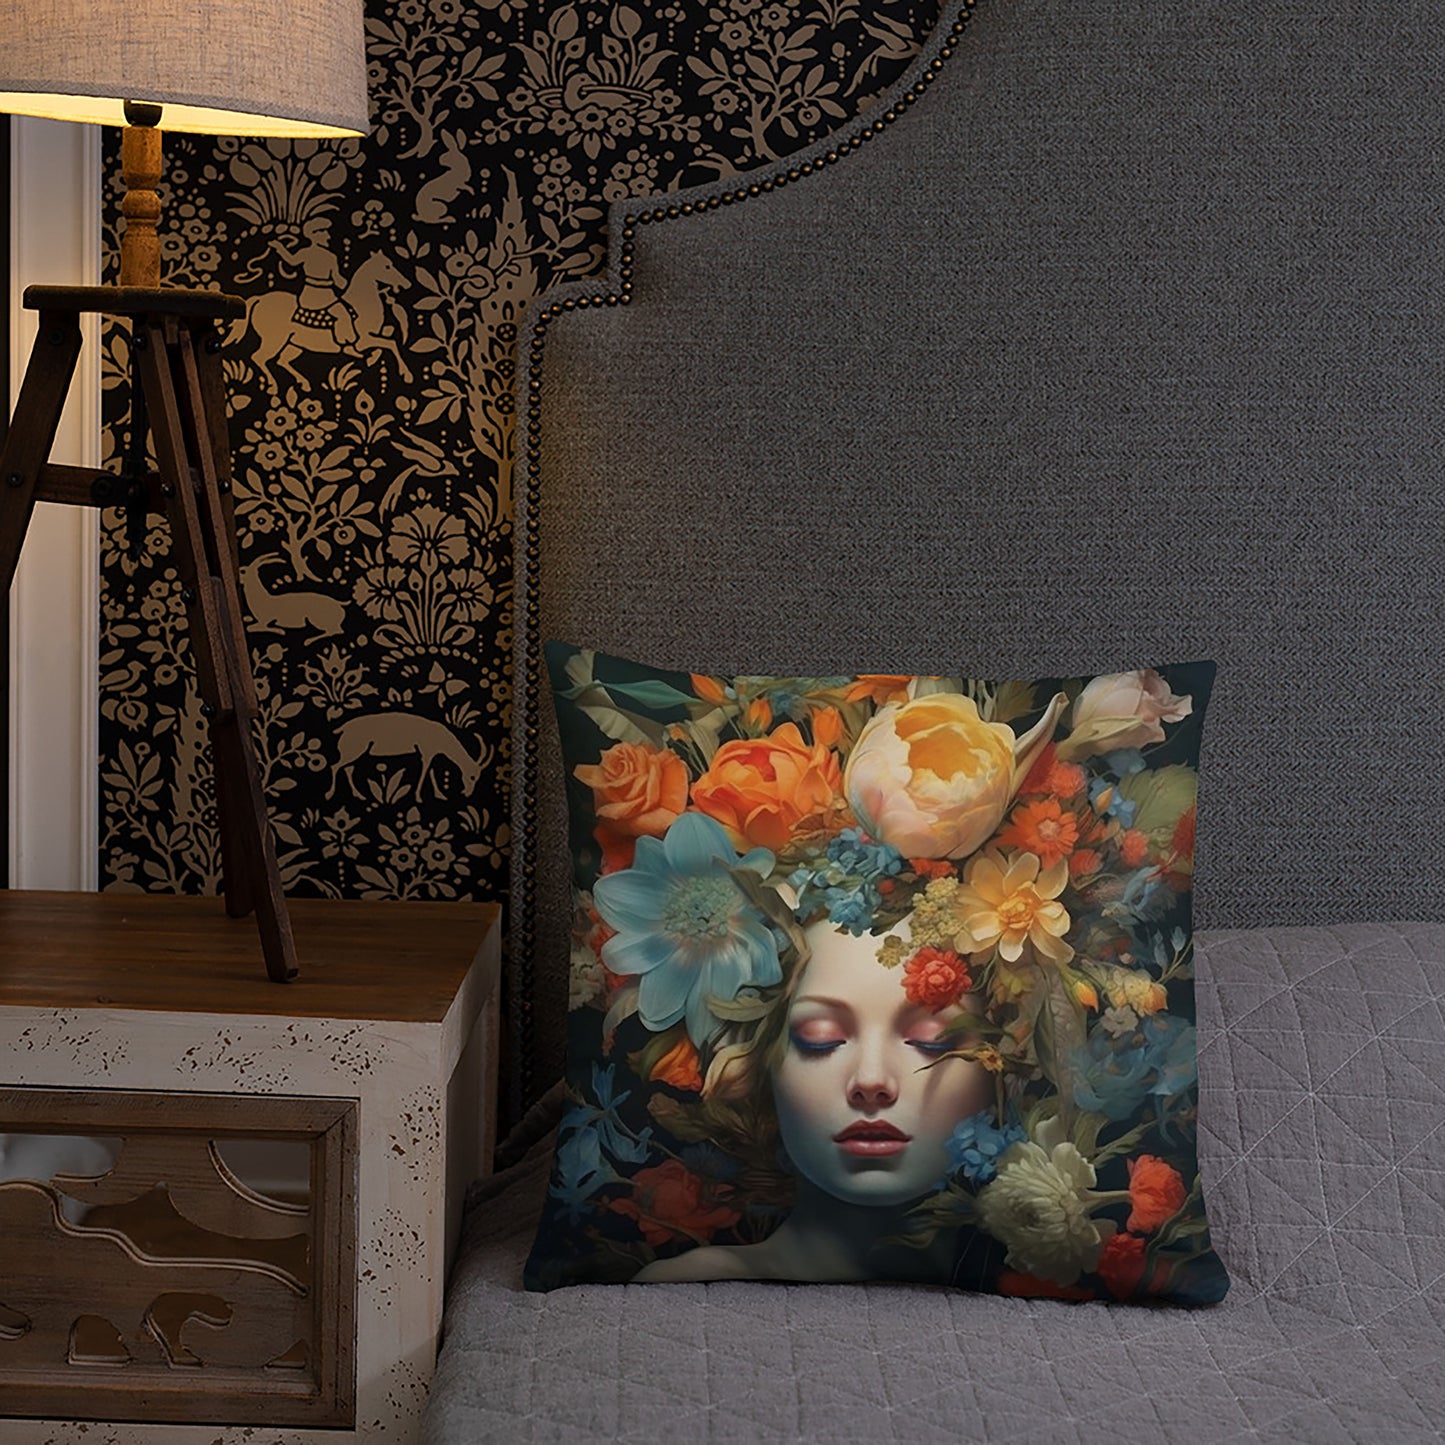 Floral Throw Pillow Female Muse Artistic Polyester Decorative Cushion 18x18